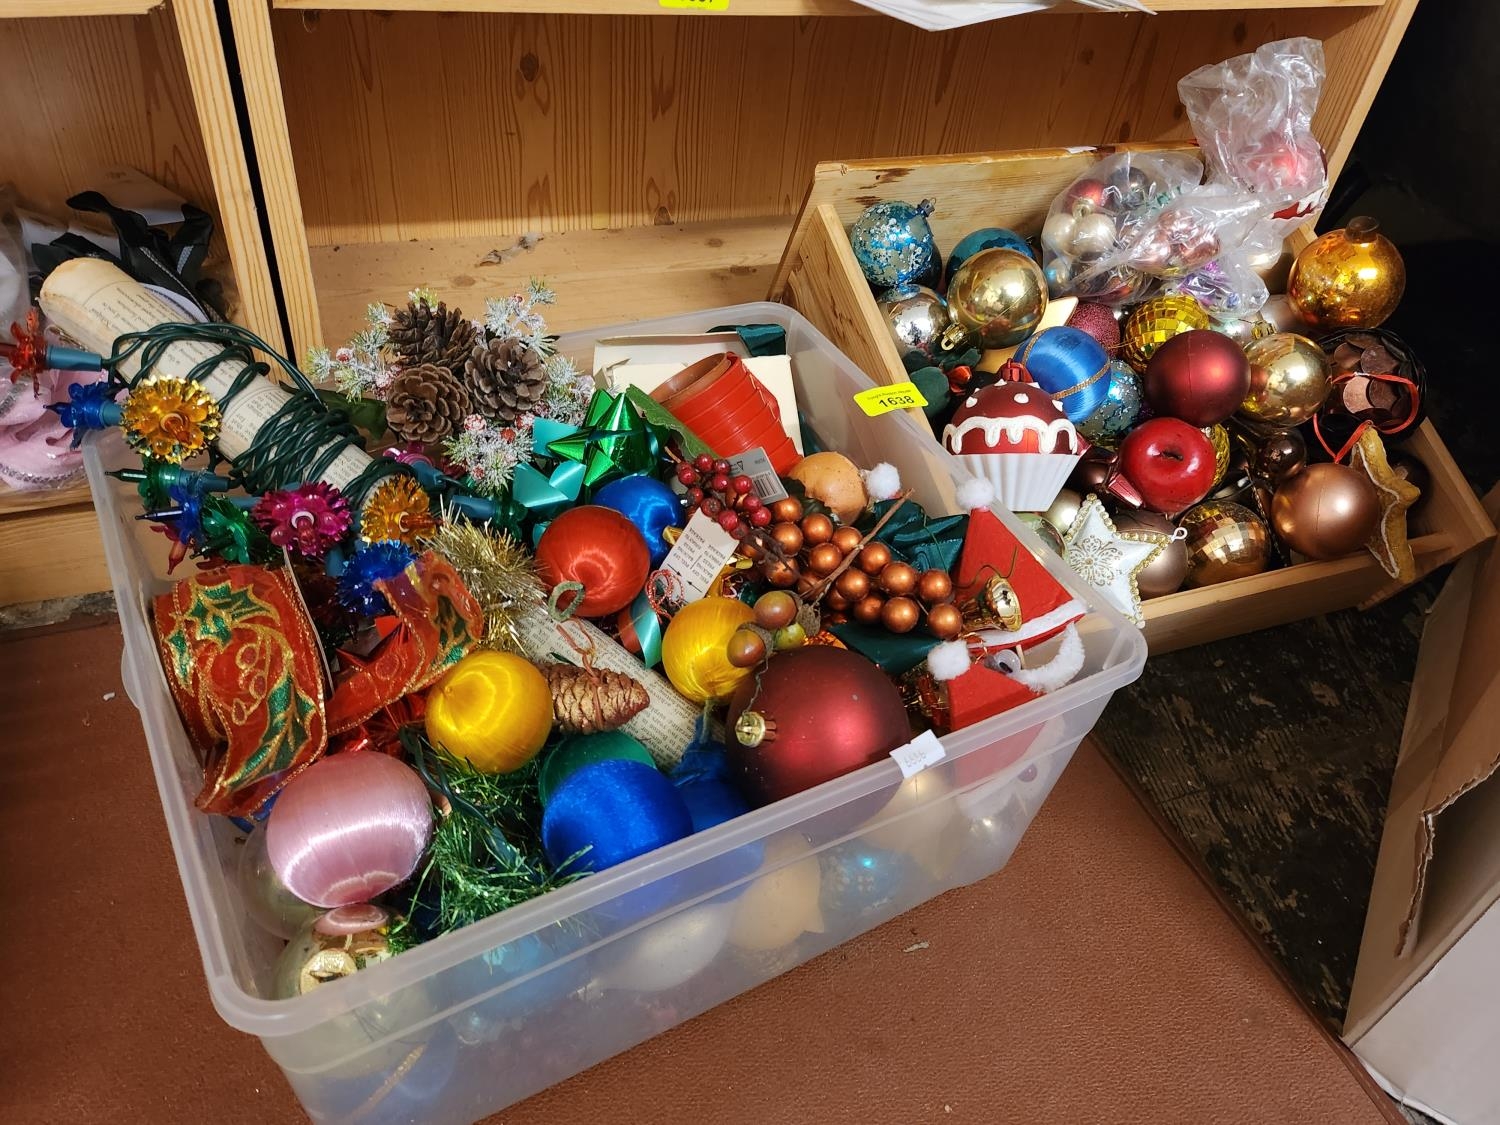 Large collection of Christmas decorations including baubles and lights